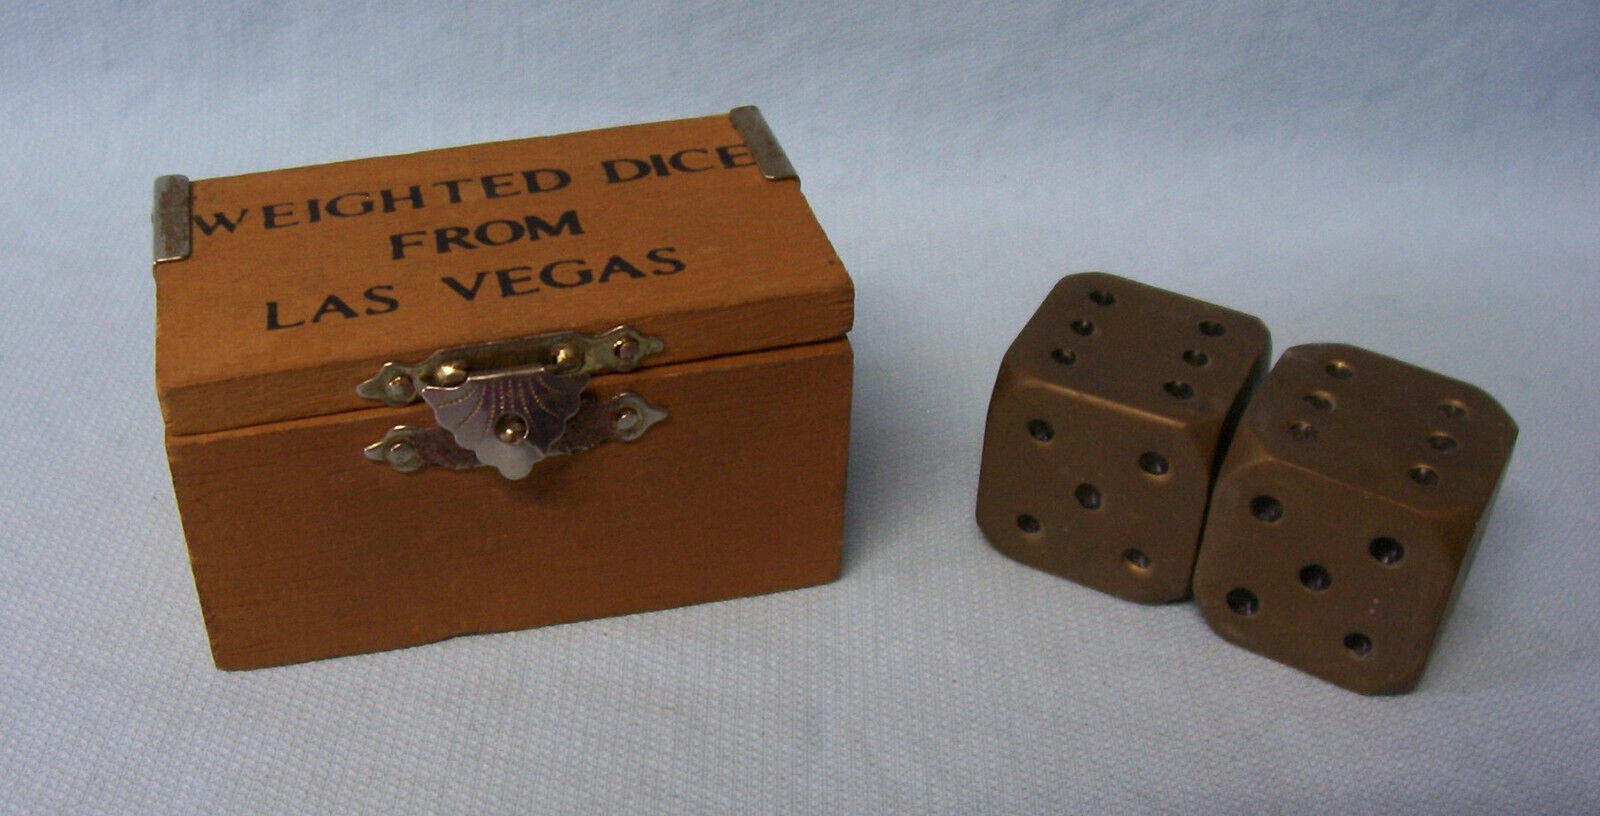 WEIGHTED BRASS DICE Vintage Pair Dice from Las Vegas in Wooden Hinge Box (A1)